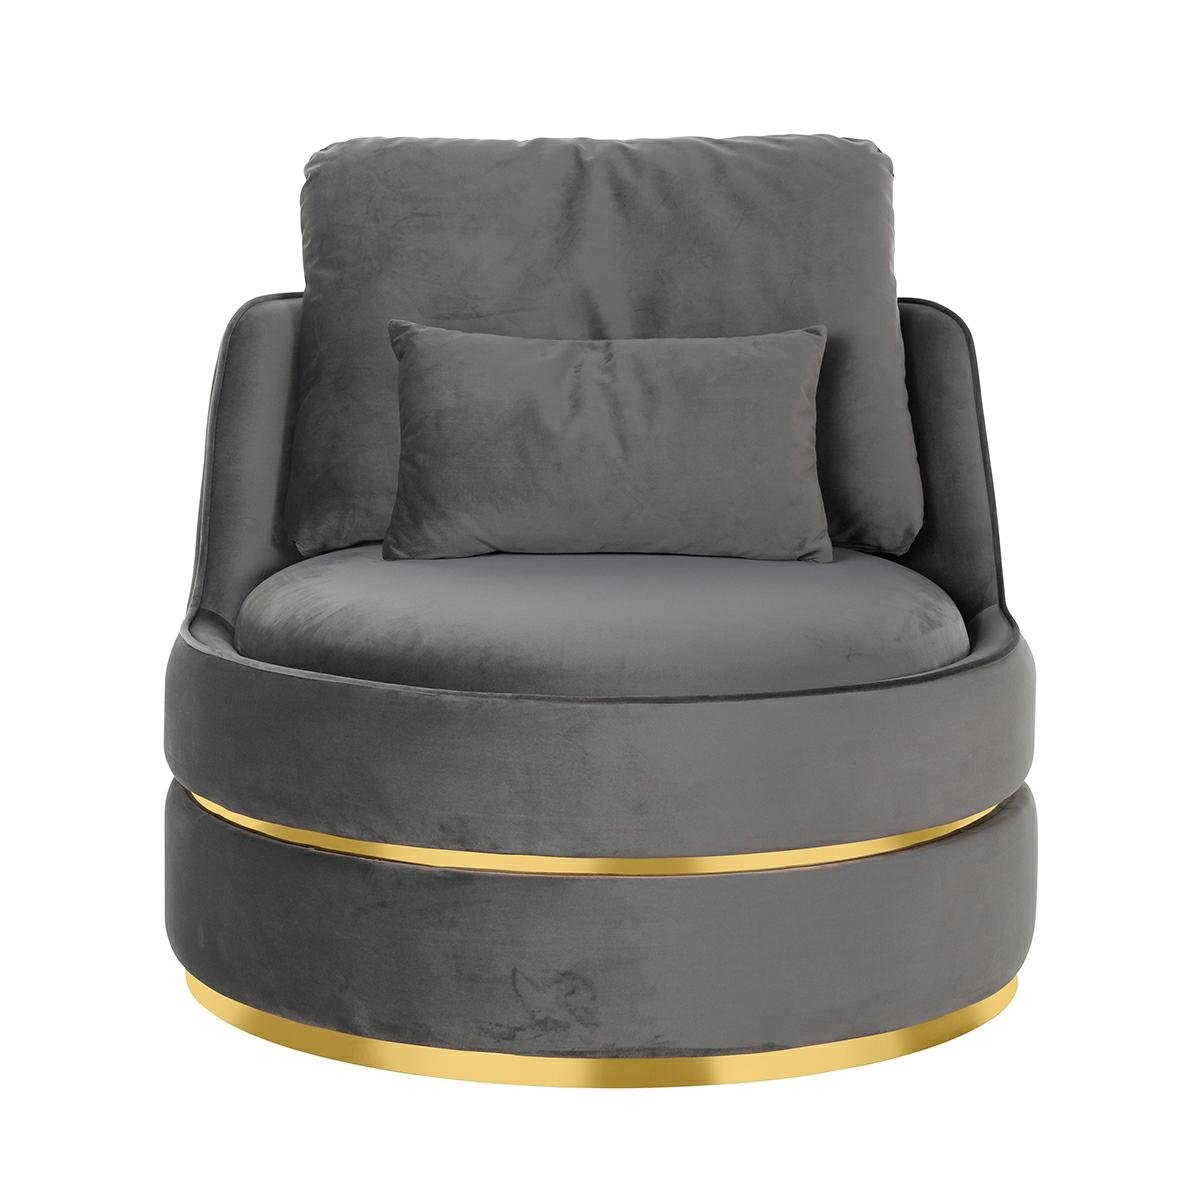 Kylie is a unique combination of convenience with an exclusive look in the glamor style. Two velor pillows increase the comfort of the chair to the highest level. The base from brushed golden steel gives Kylie modern design, which will fit well into the latest trends.